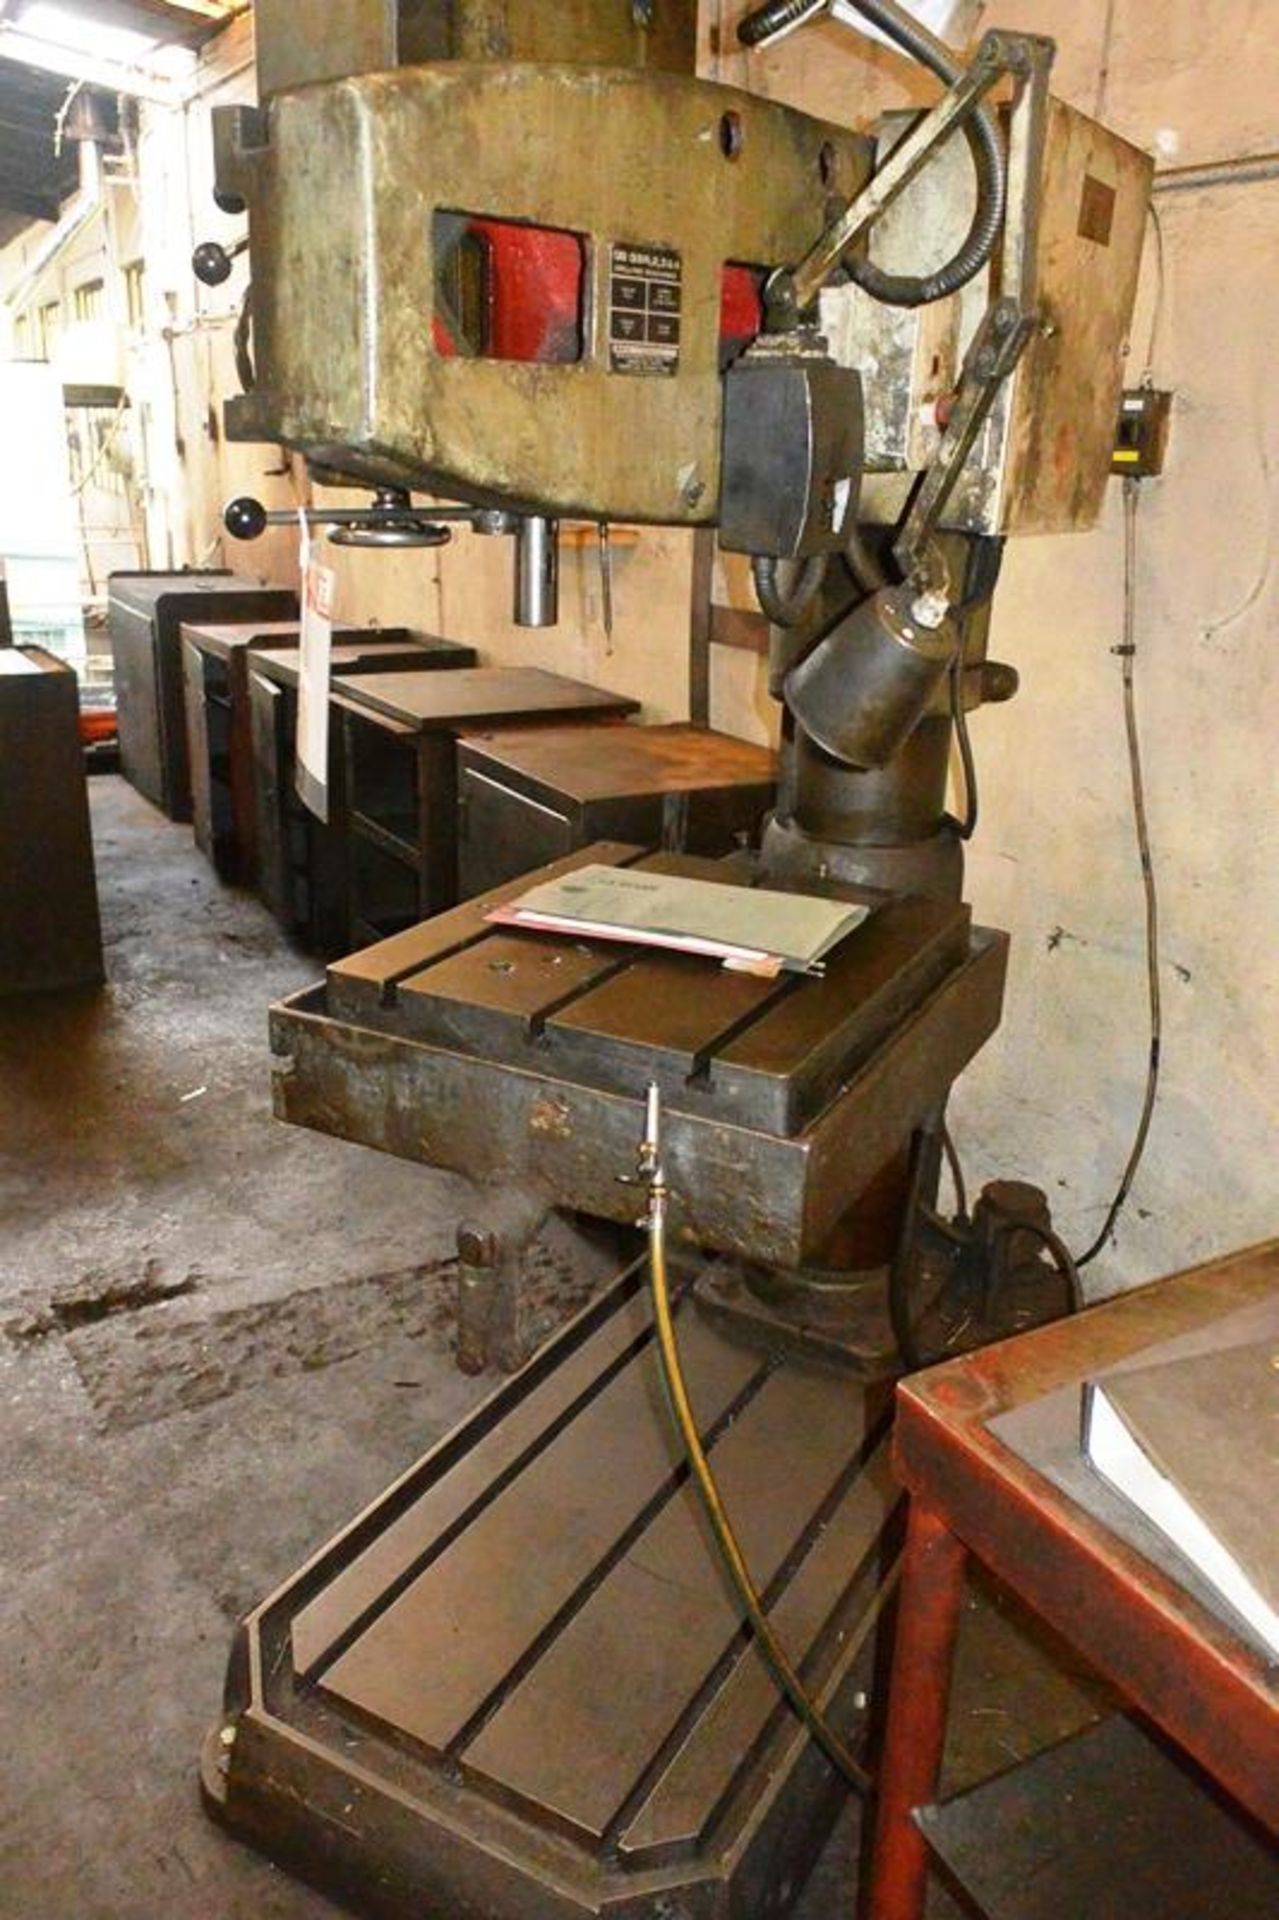 Qualters & Smith R3 radial arm drill, serial no. 1100, 50 - 1750 rpm spindle speeds, 36" swing - Image 4 of 7